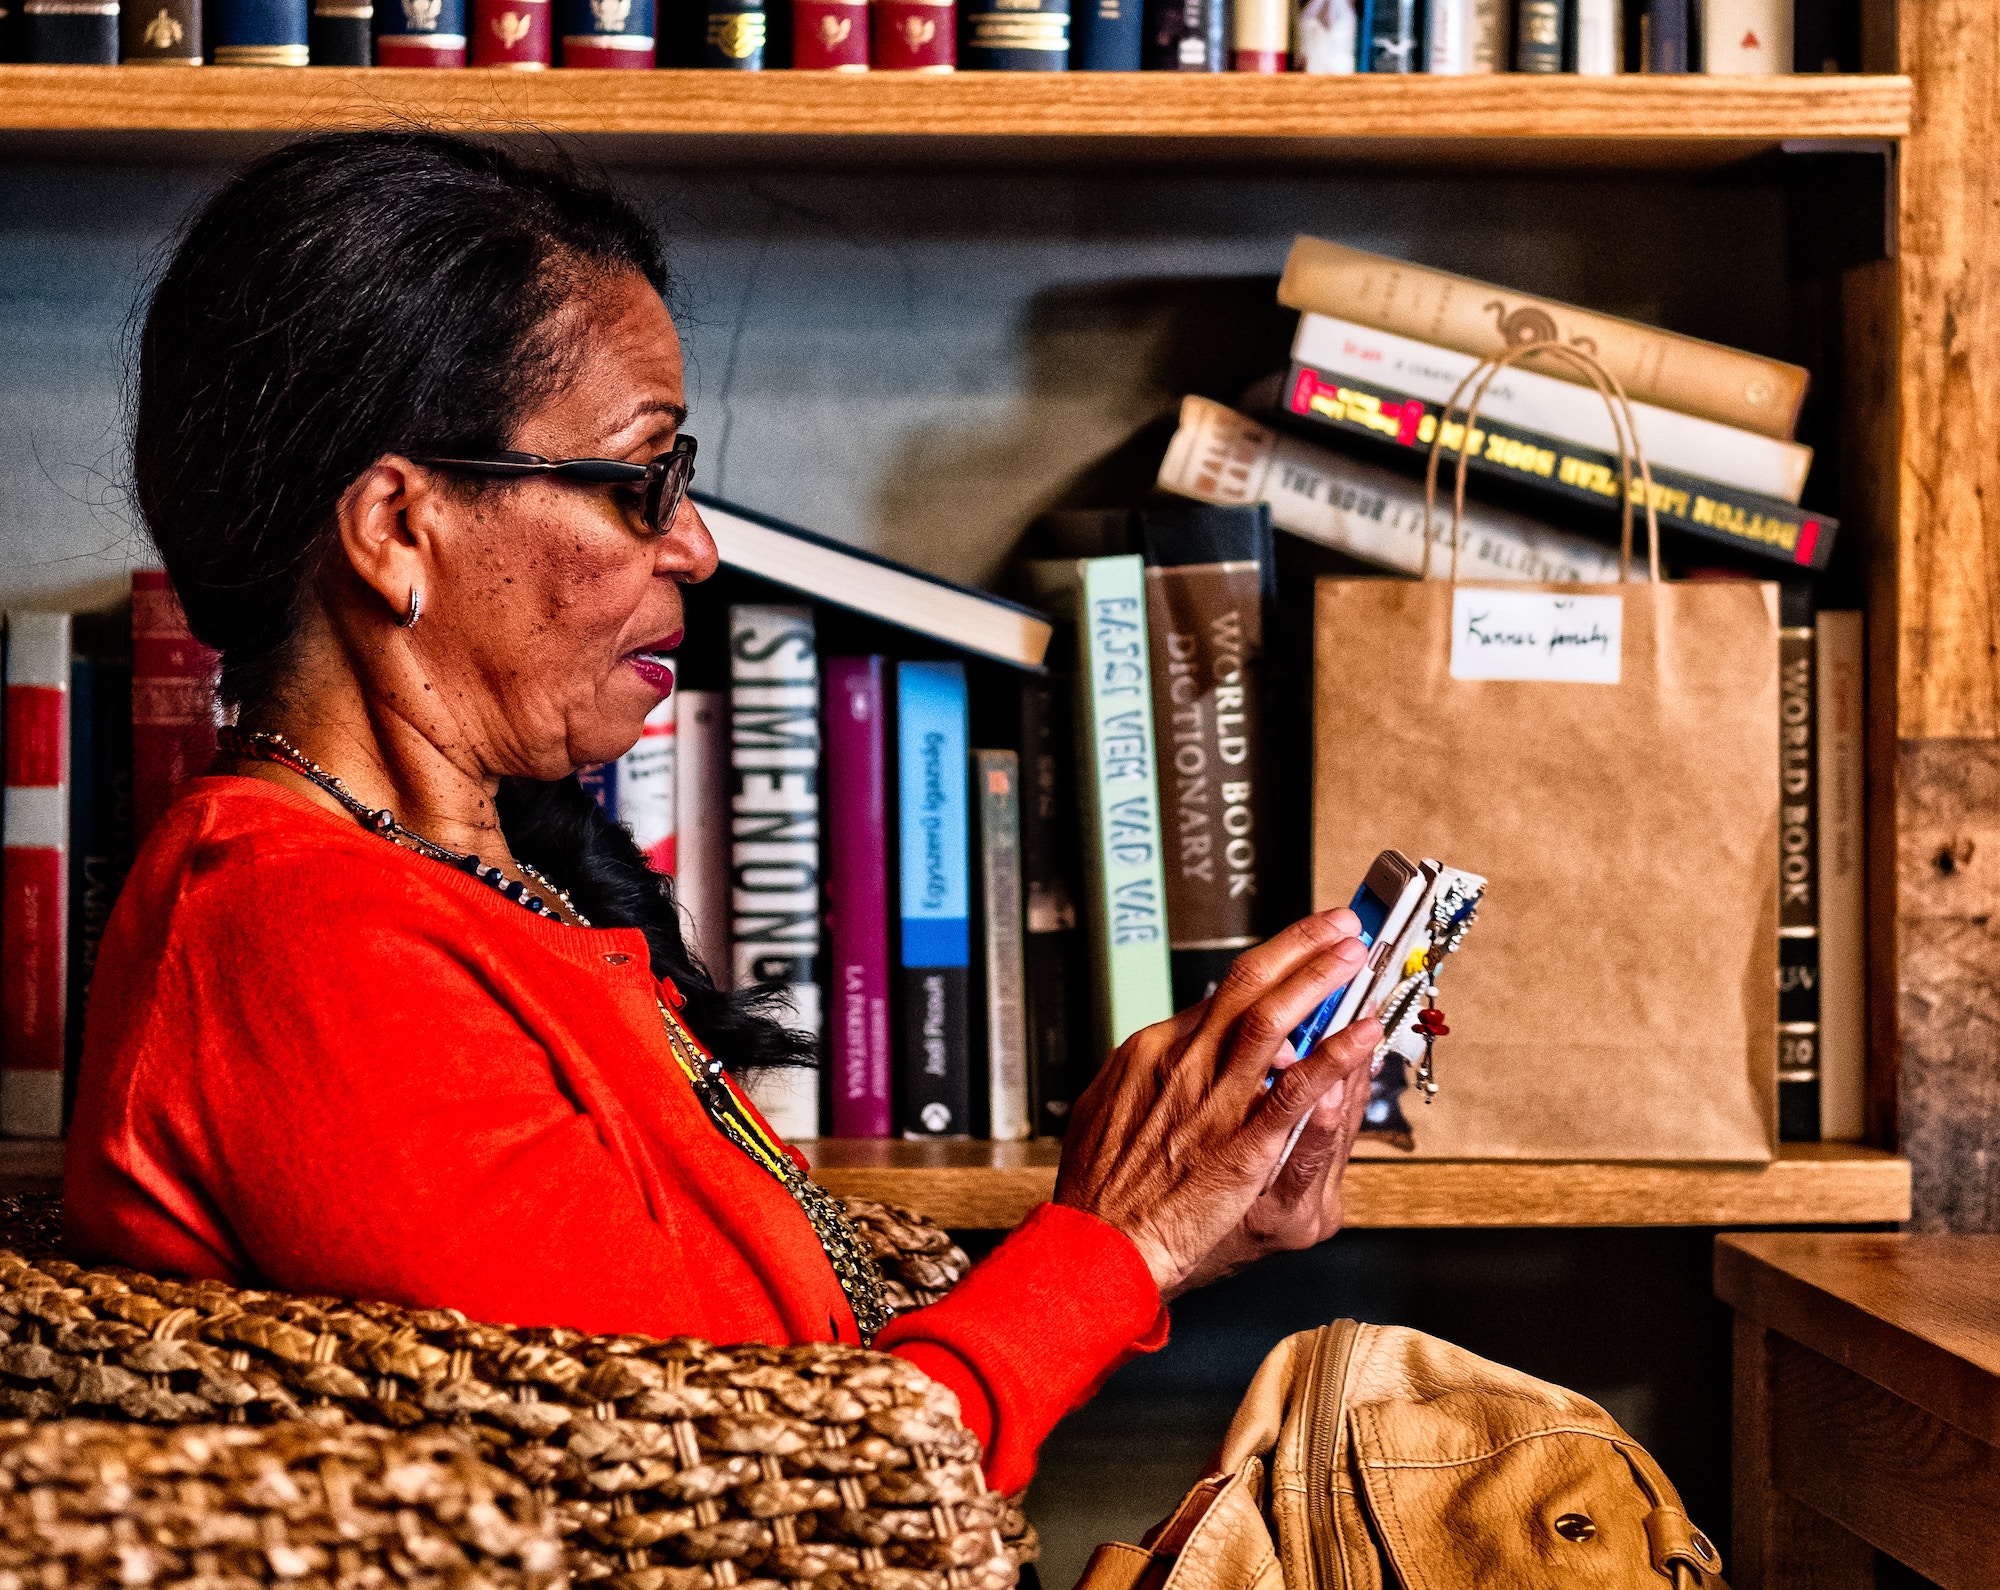 Woman using mobile device in a bookstore